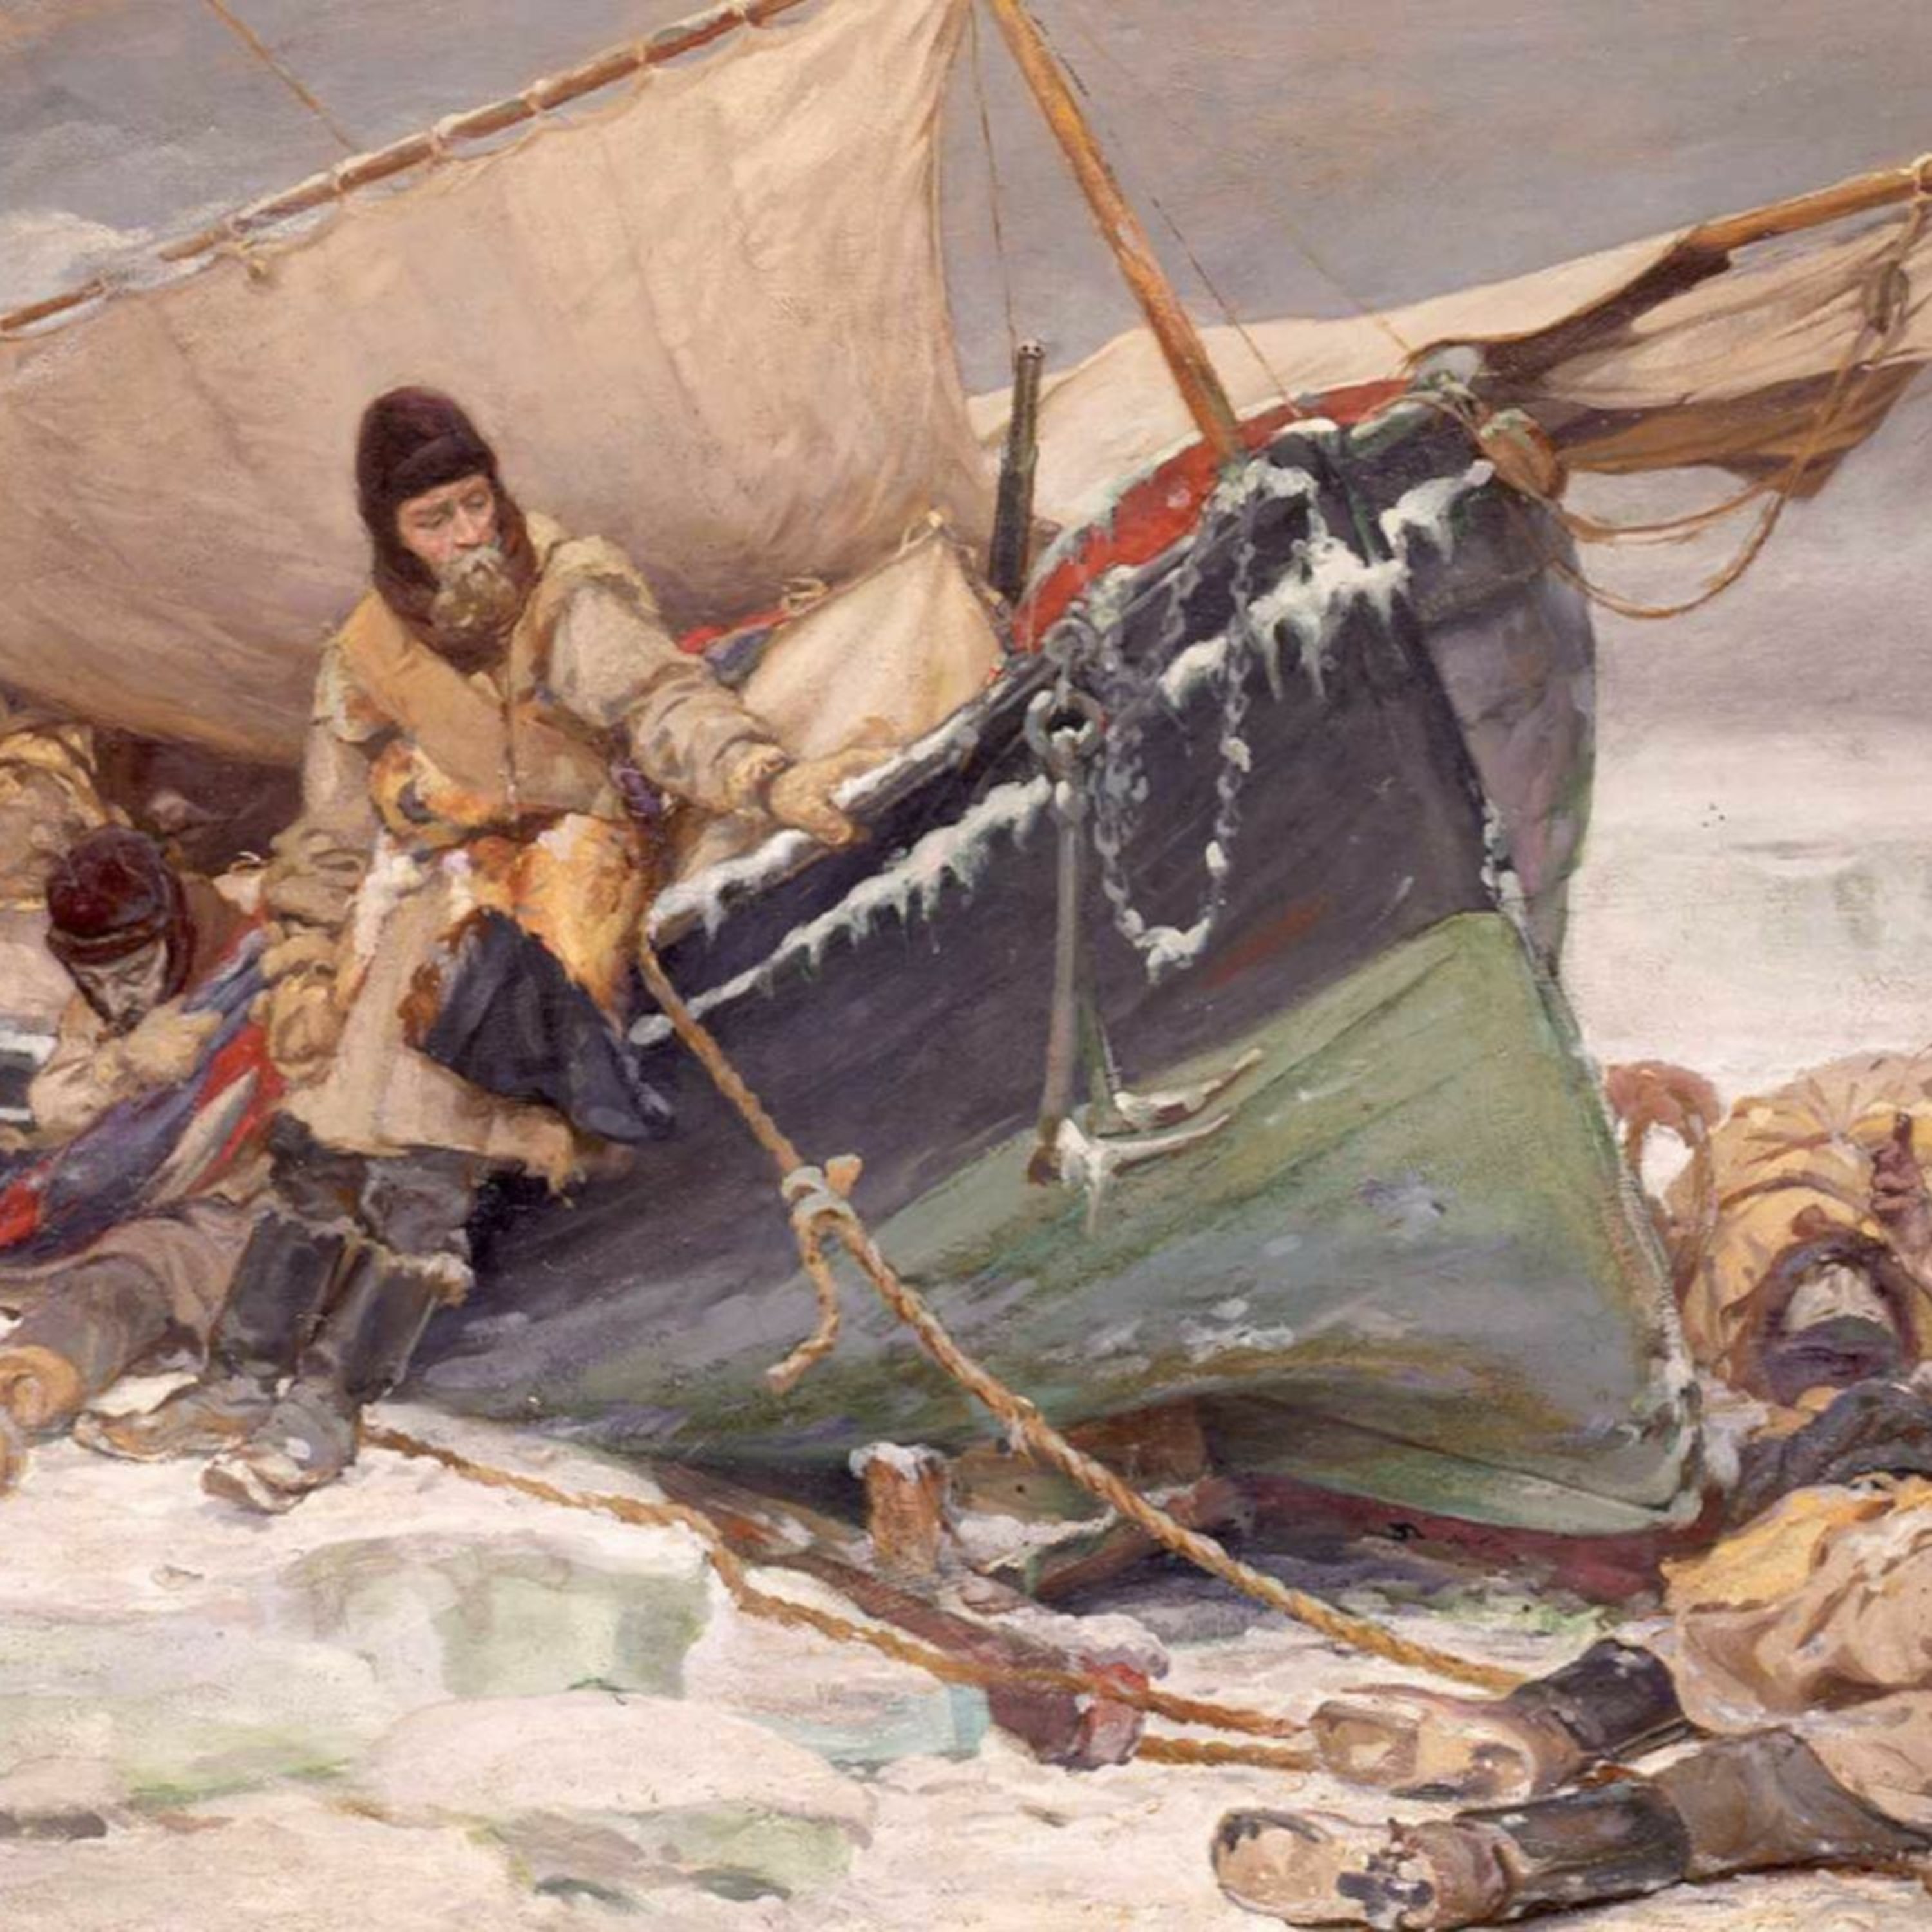 Episode 88: Franklin’s Lost Expedition